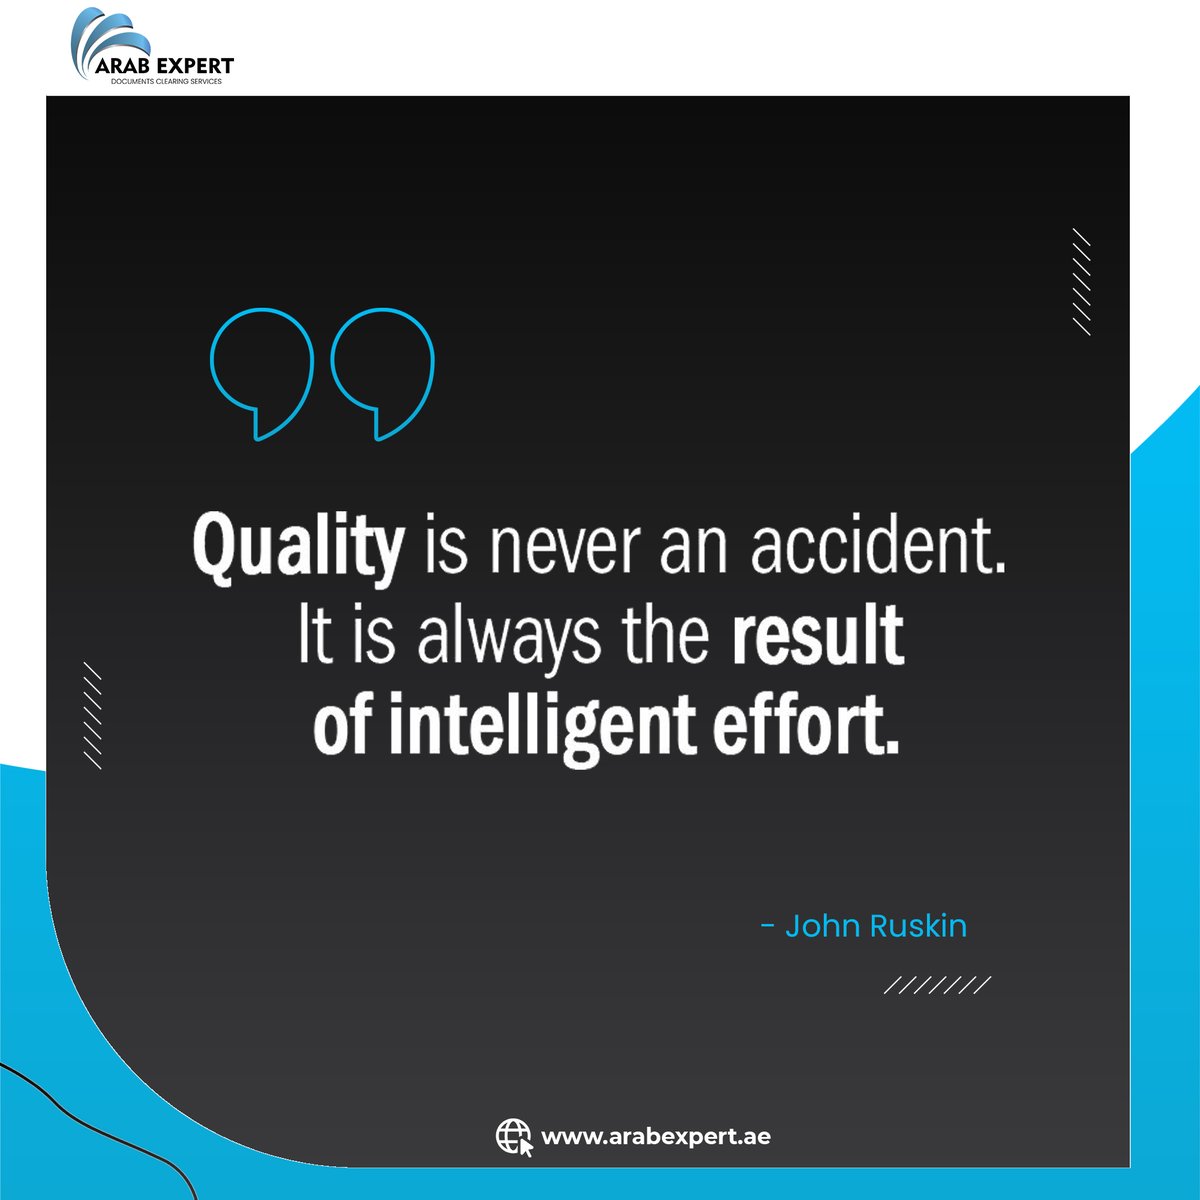 🌟 Quality isn't just a stroke of luck—it's the outcome of deliberate, smart work. Whether it's in our projects, relationships, or personal growth, it's the intentional effort that truly crafts excellence. 💡👍

#QualityOverQuantity #IntelligentEffort